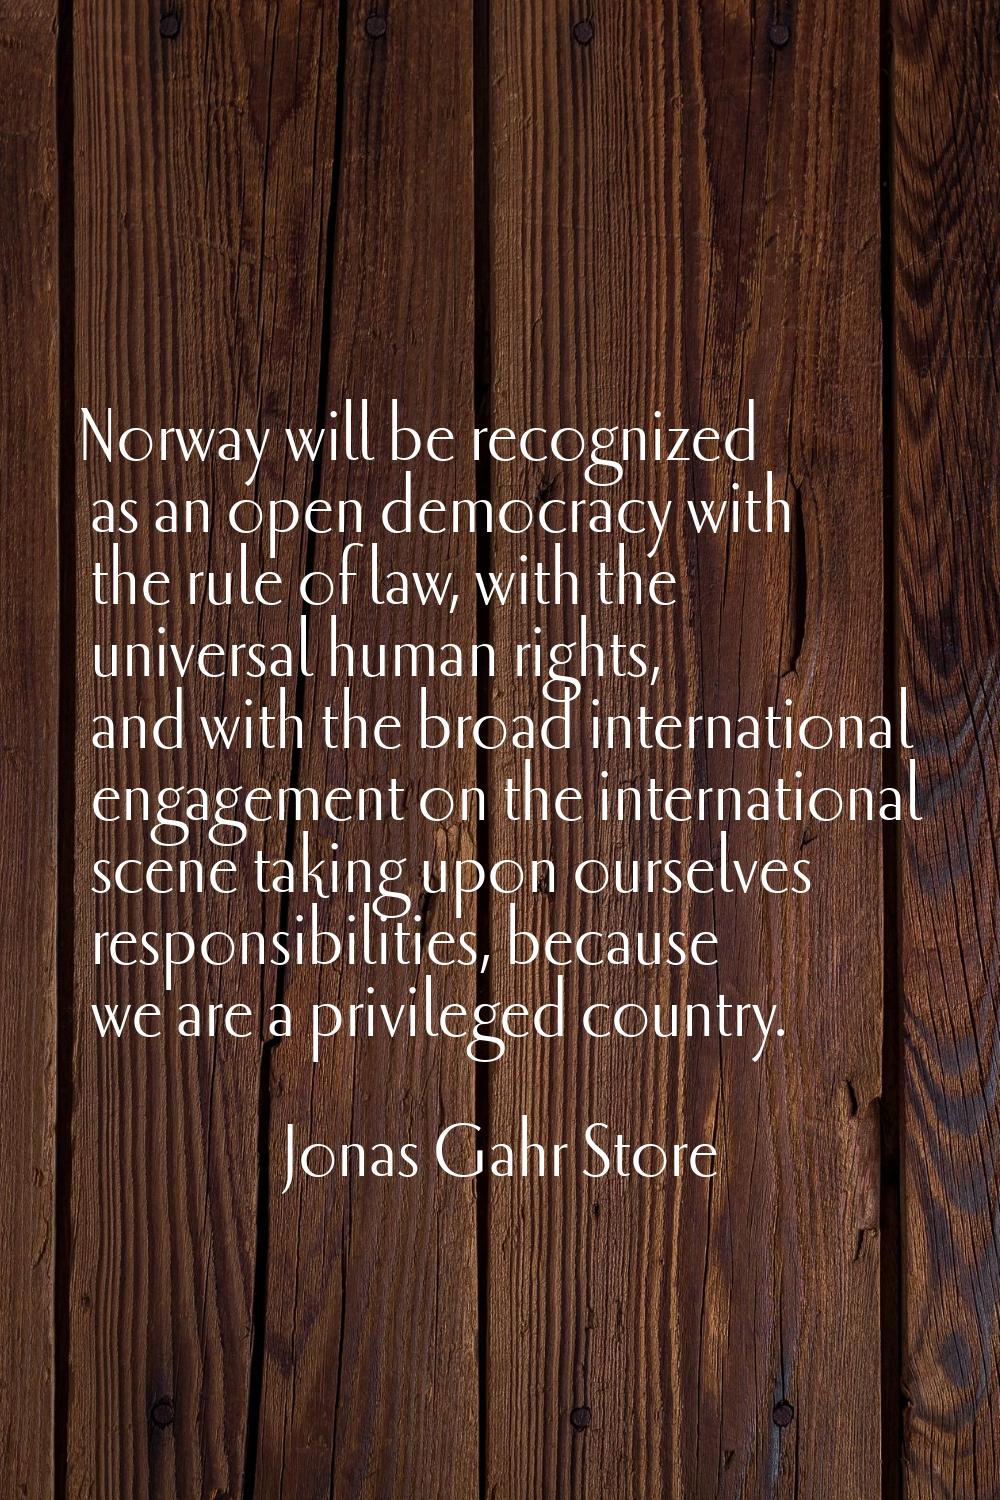 Norway will be recognized as an open democracy with the rule of law, with the universal human right